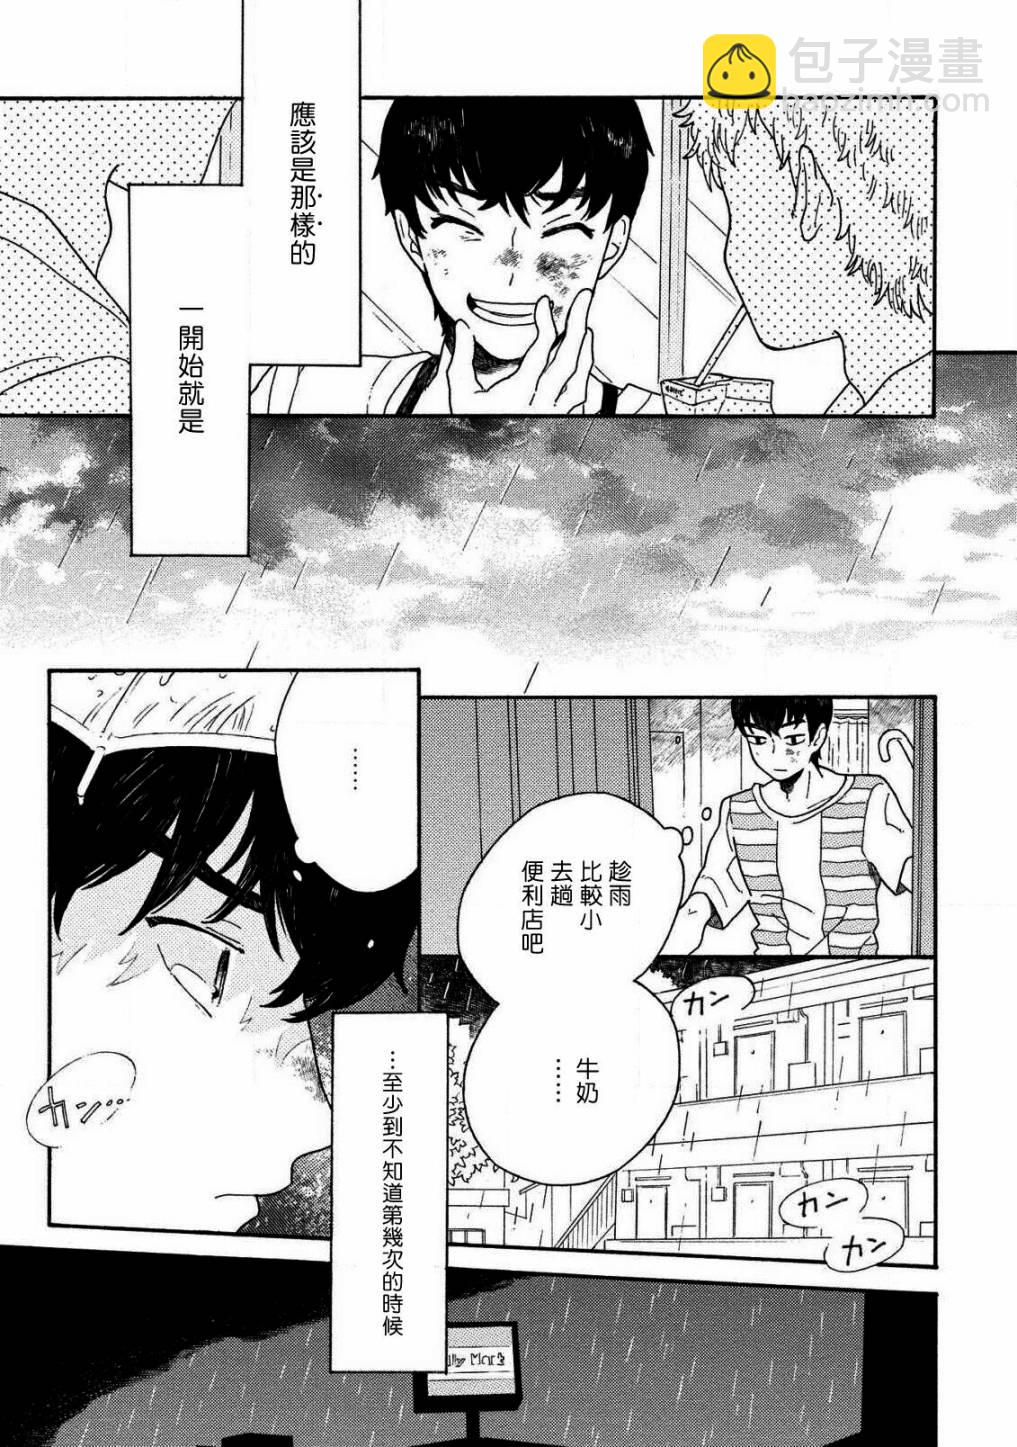 Sneaky Red - 第01話 - 2